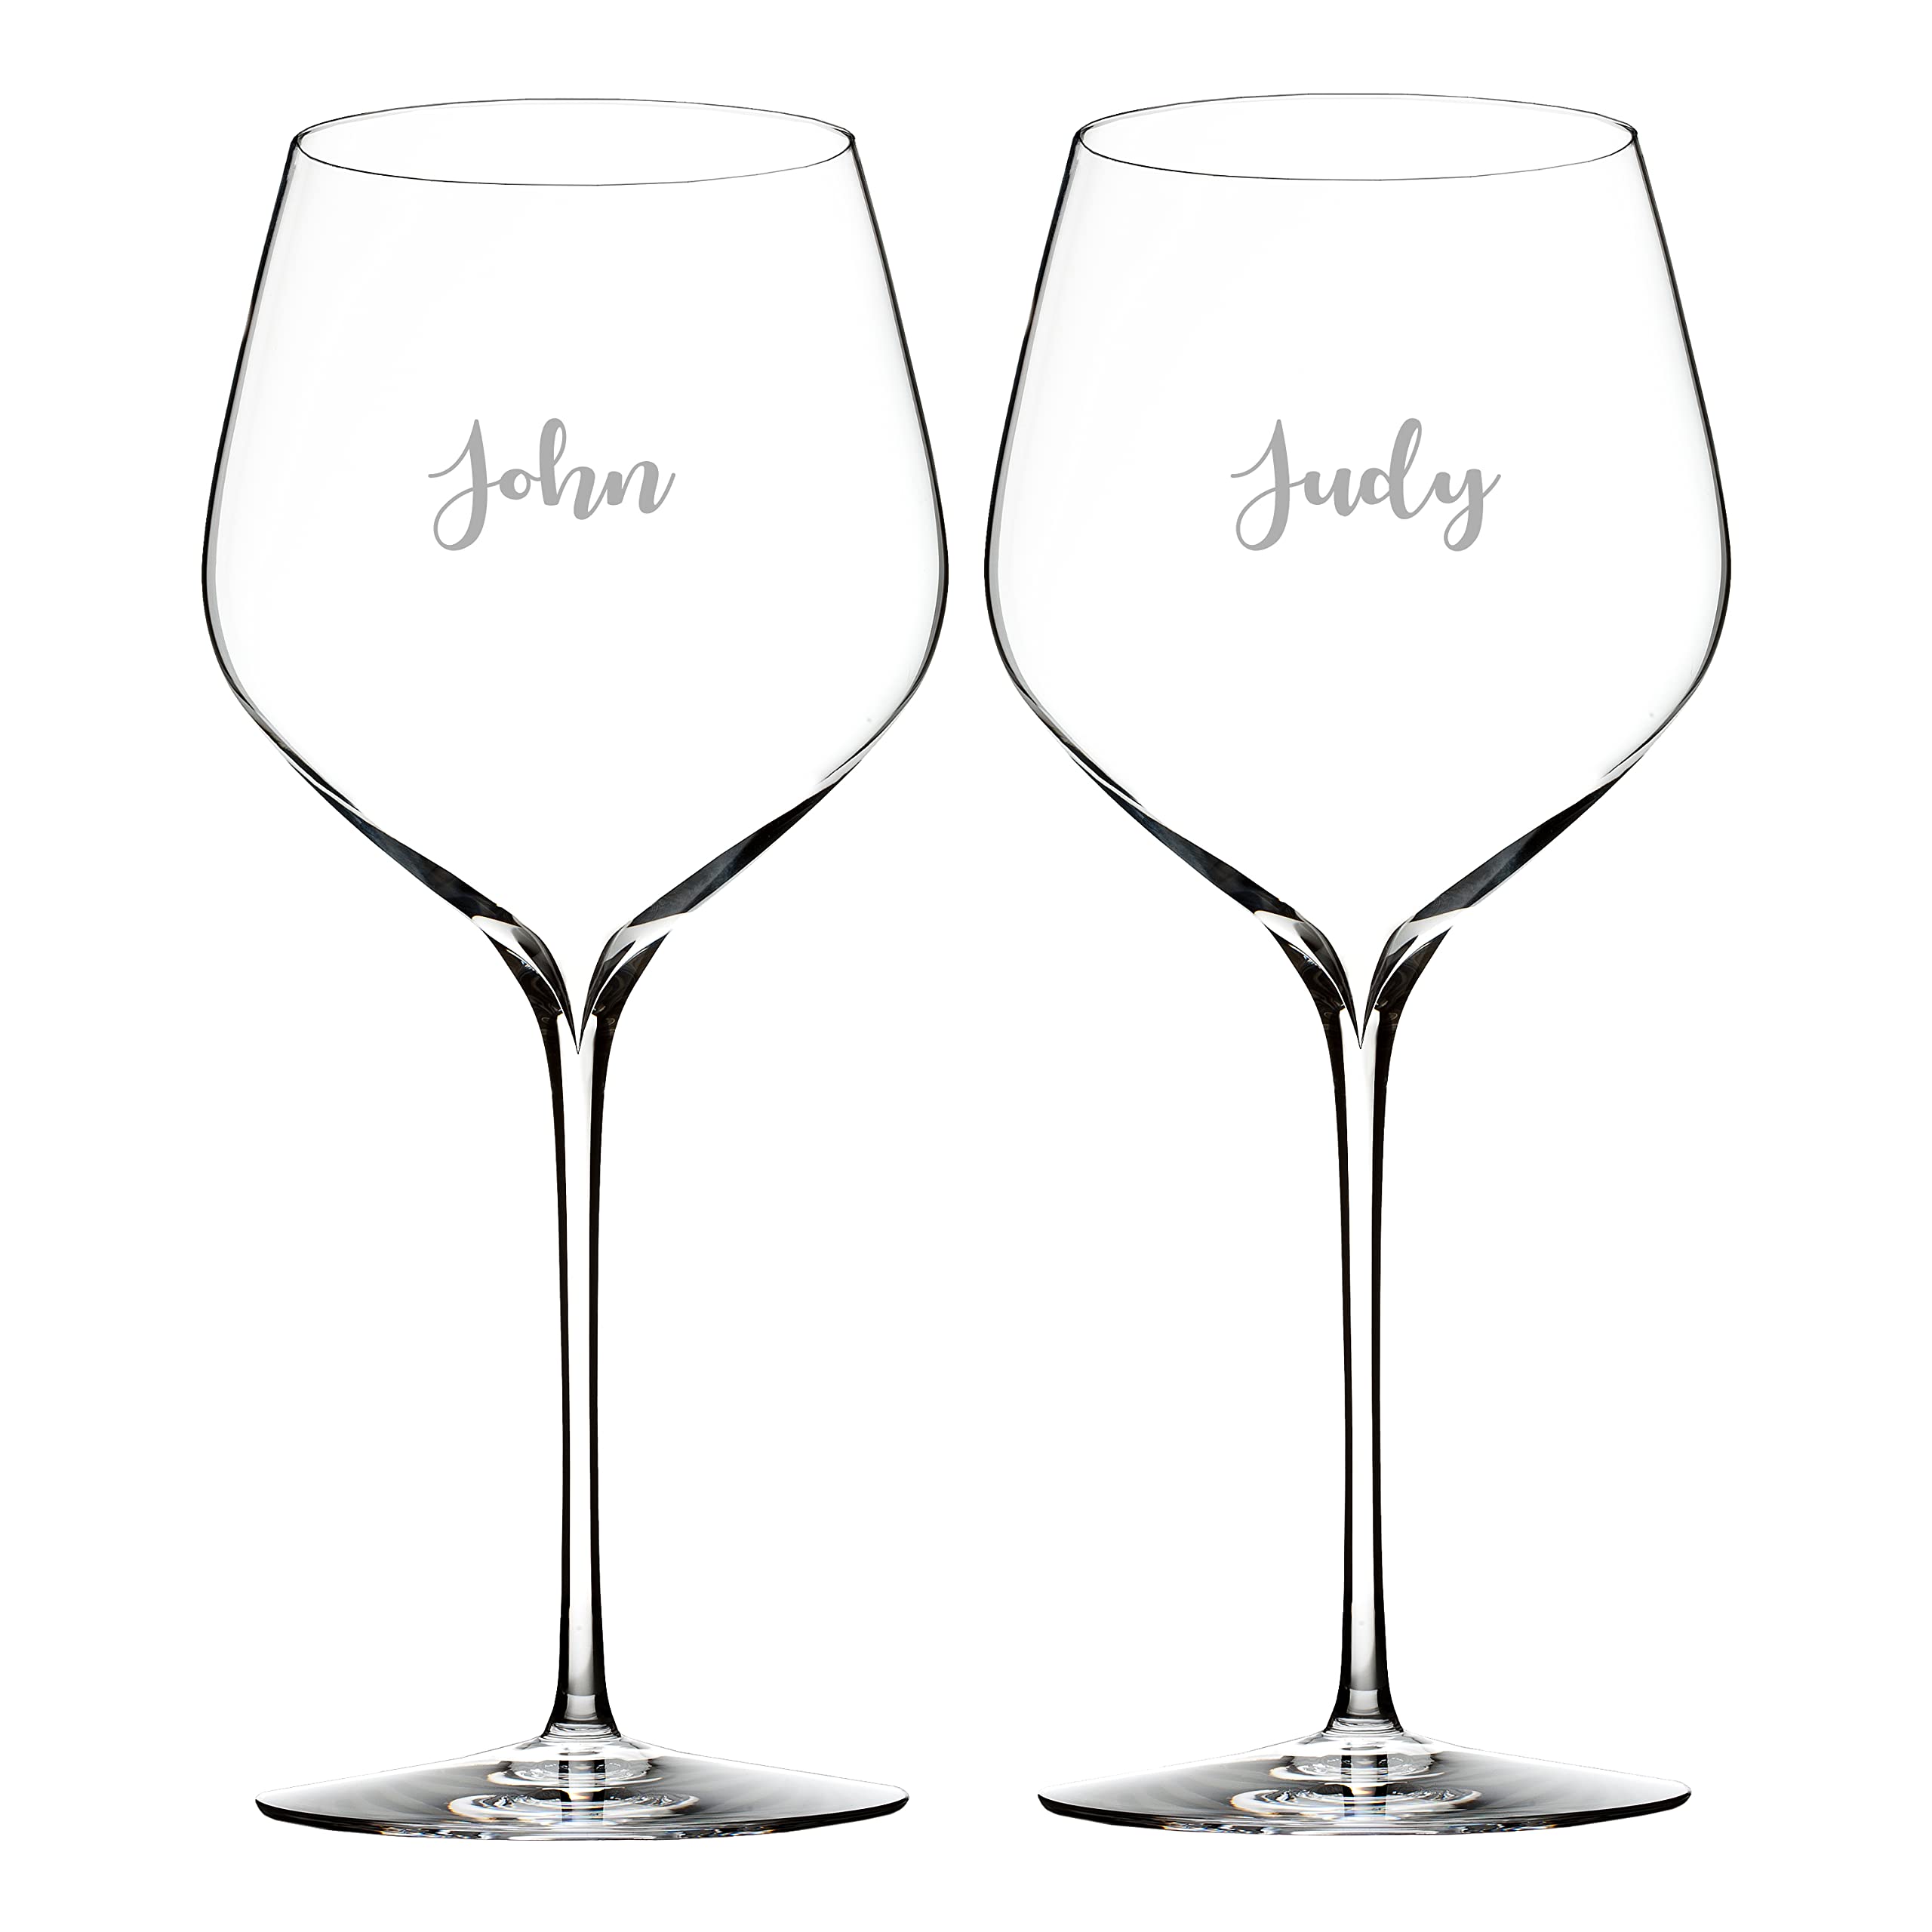 Waterford Personalized Elegance 26.7oz Cabernet Sauvignon Wine Glasses, Set of 2 Custom Engraved Crystal Red Wine Glasses for St. Emilion, Listrac, Moulis, Margaux and More